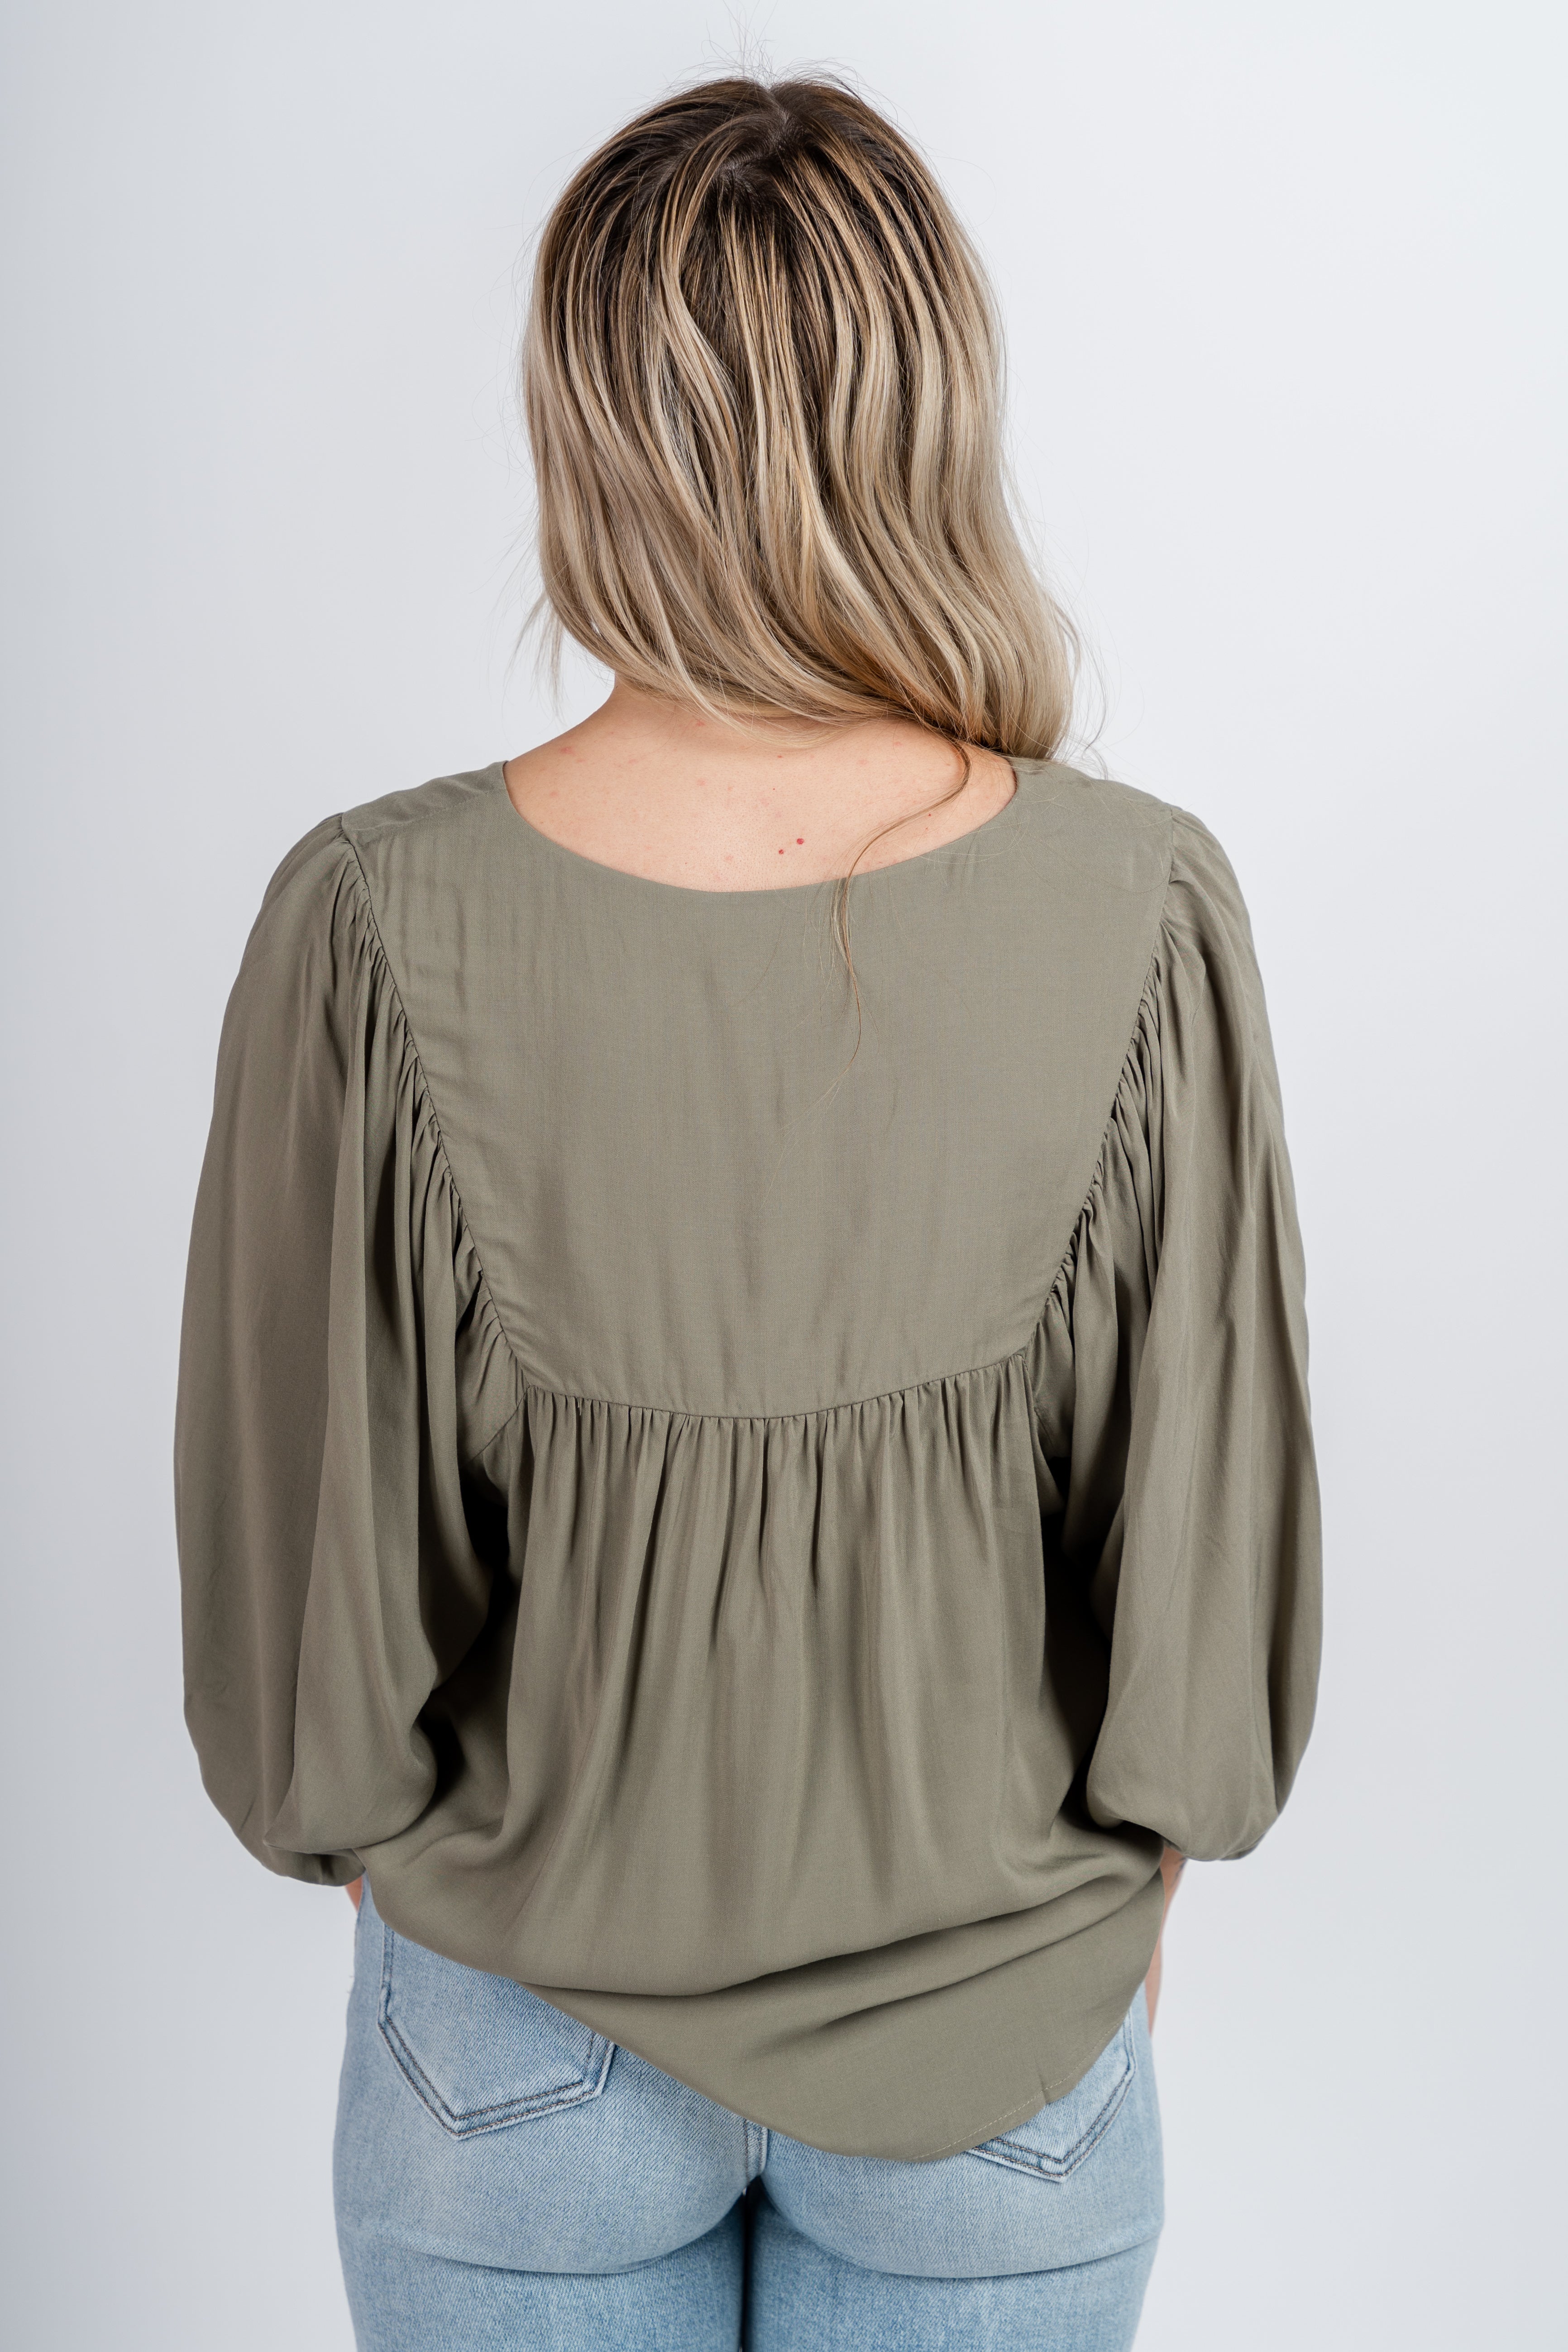 Tops - Blouses, Tanks, Z Supply tops, Piko tops Page 8 - Lush Fashion ...